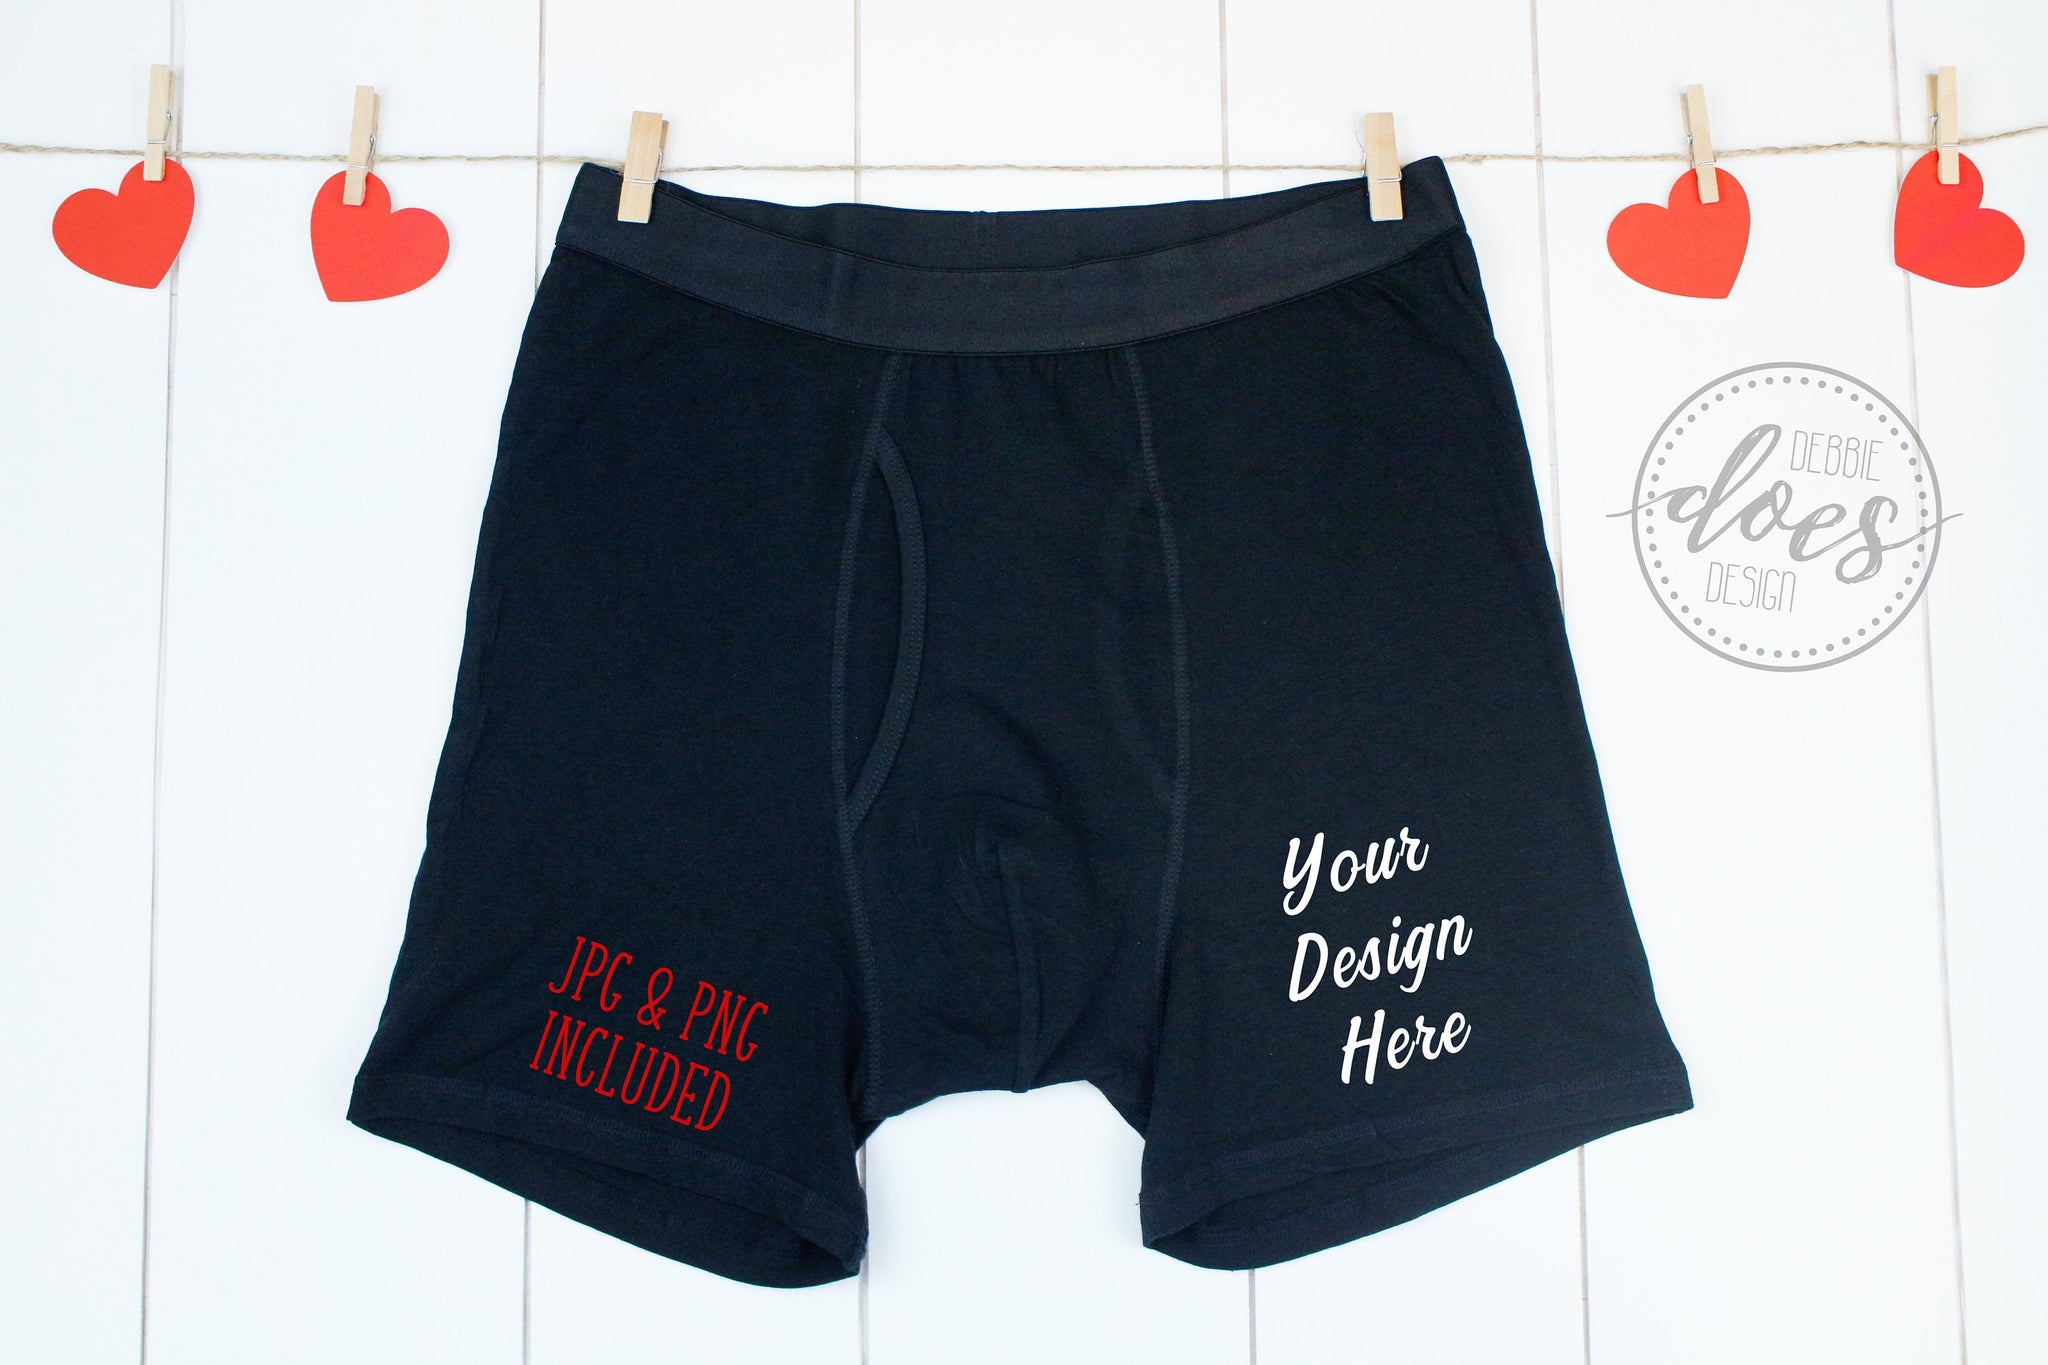 Buy Boxer Shorts Mockup Off 73 Free Delivery Reportes Mobi Snare Arvixe Com